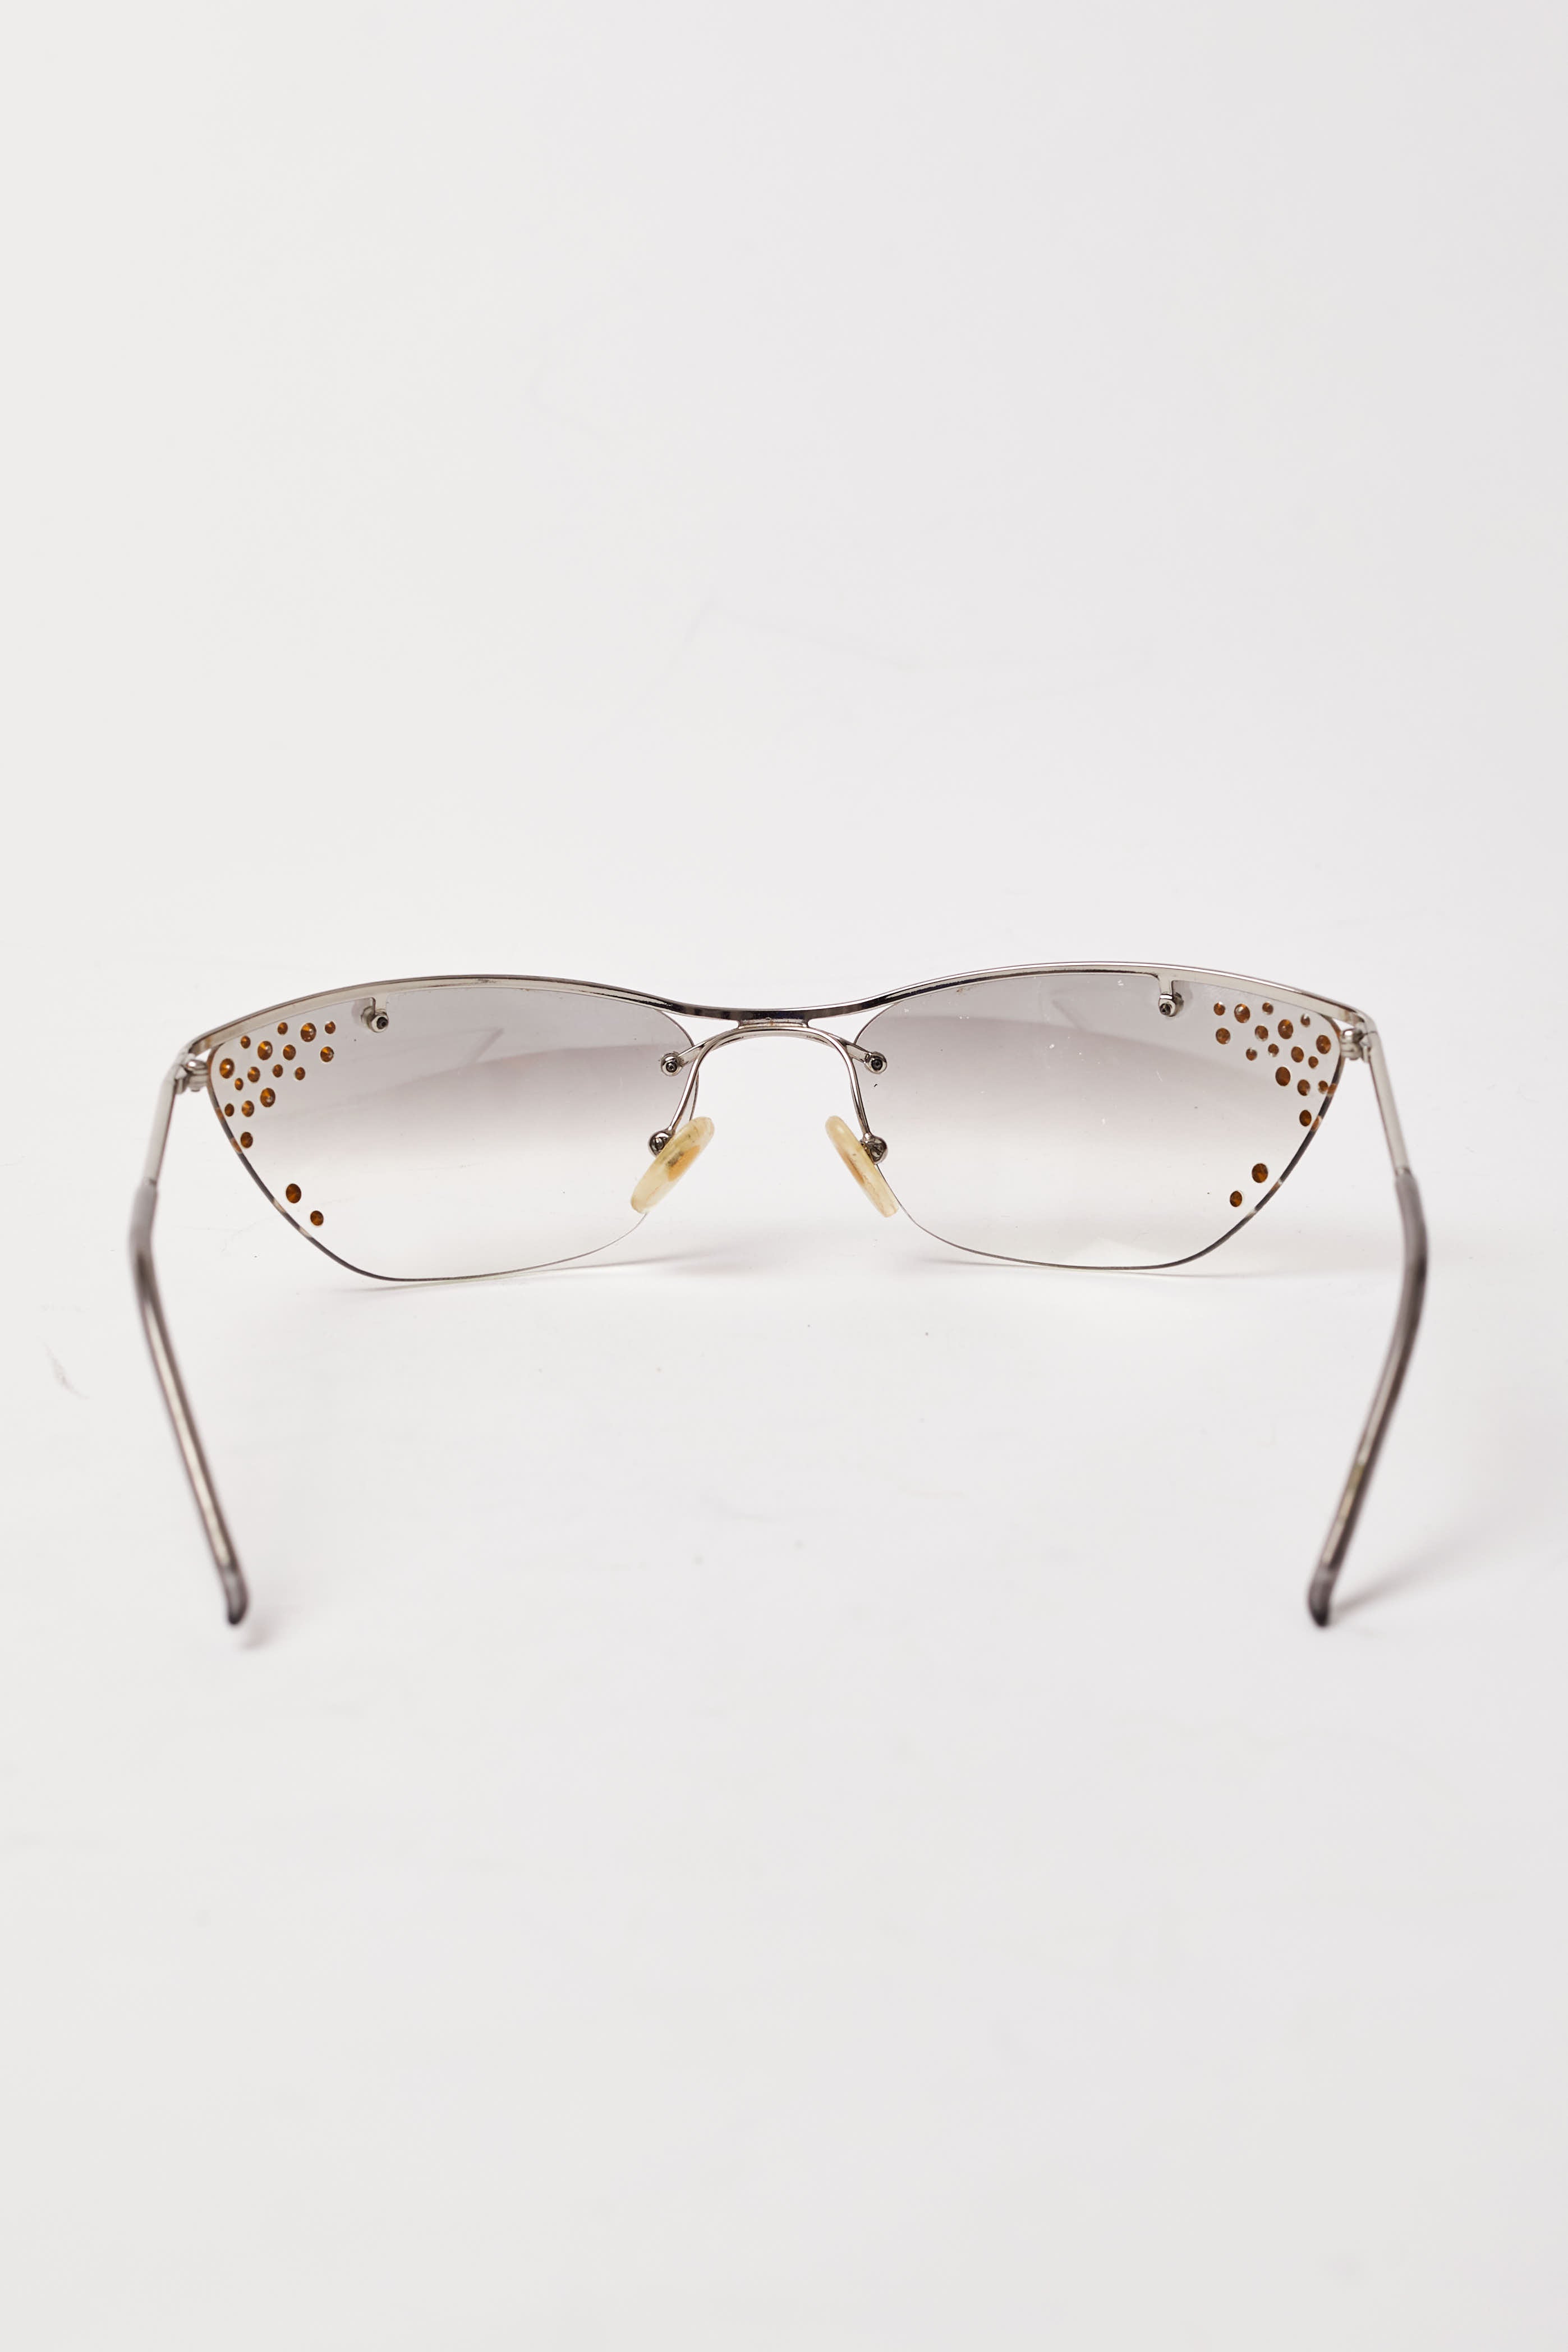 Christian Dior <br> Y2K John Galliano Flash rimless sunglasses with crystals